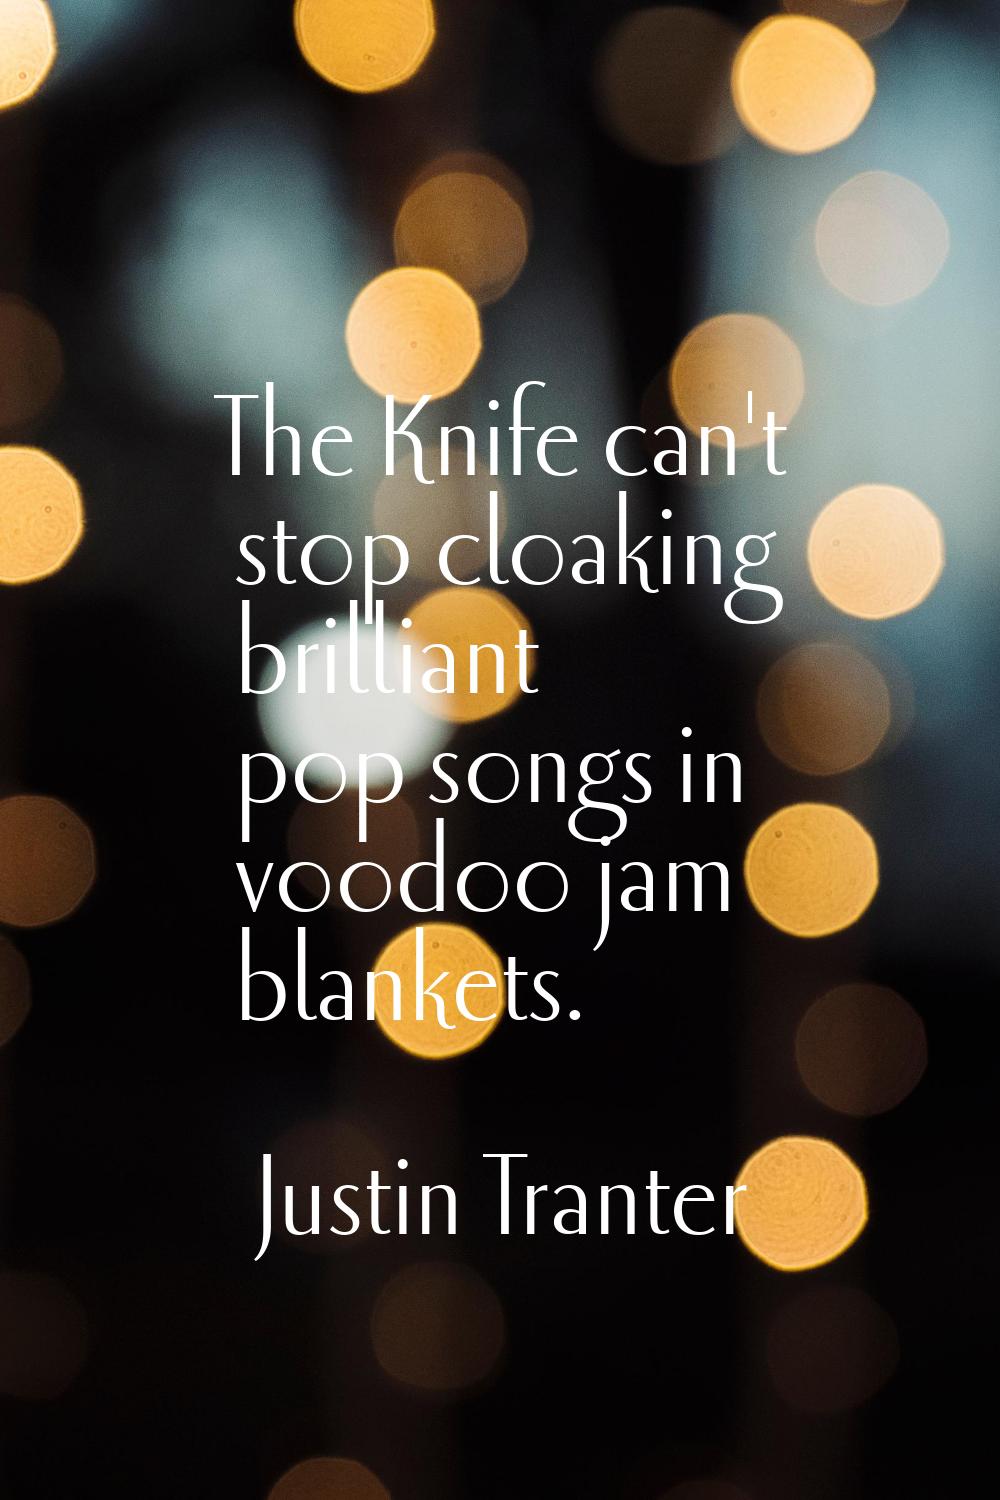 The Knife can't stop cloaking brilliant pop songs in voodoo jam blankets.